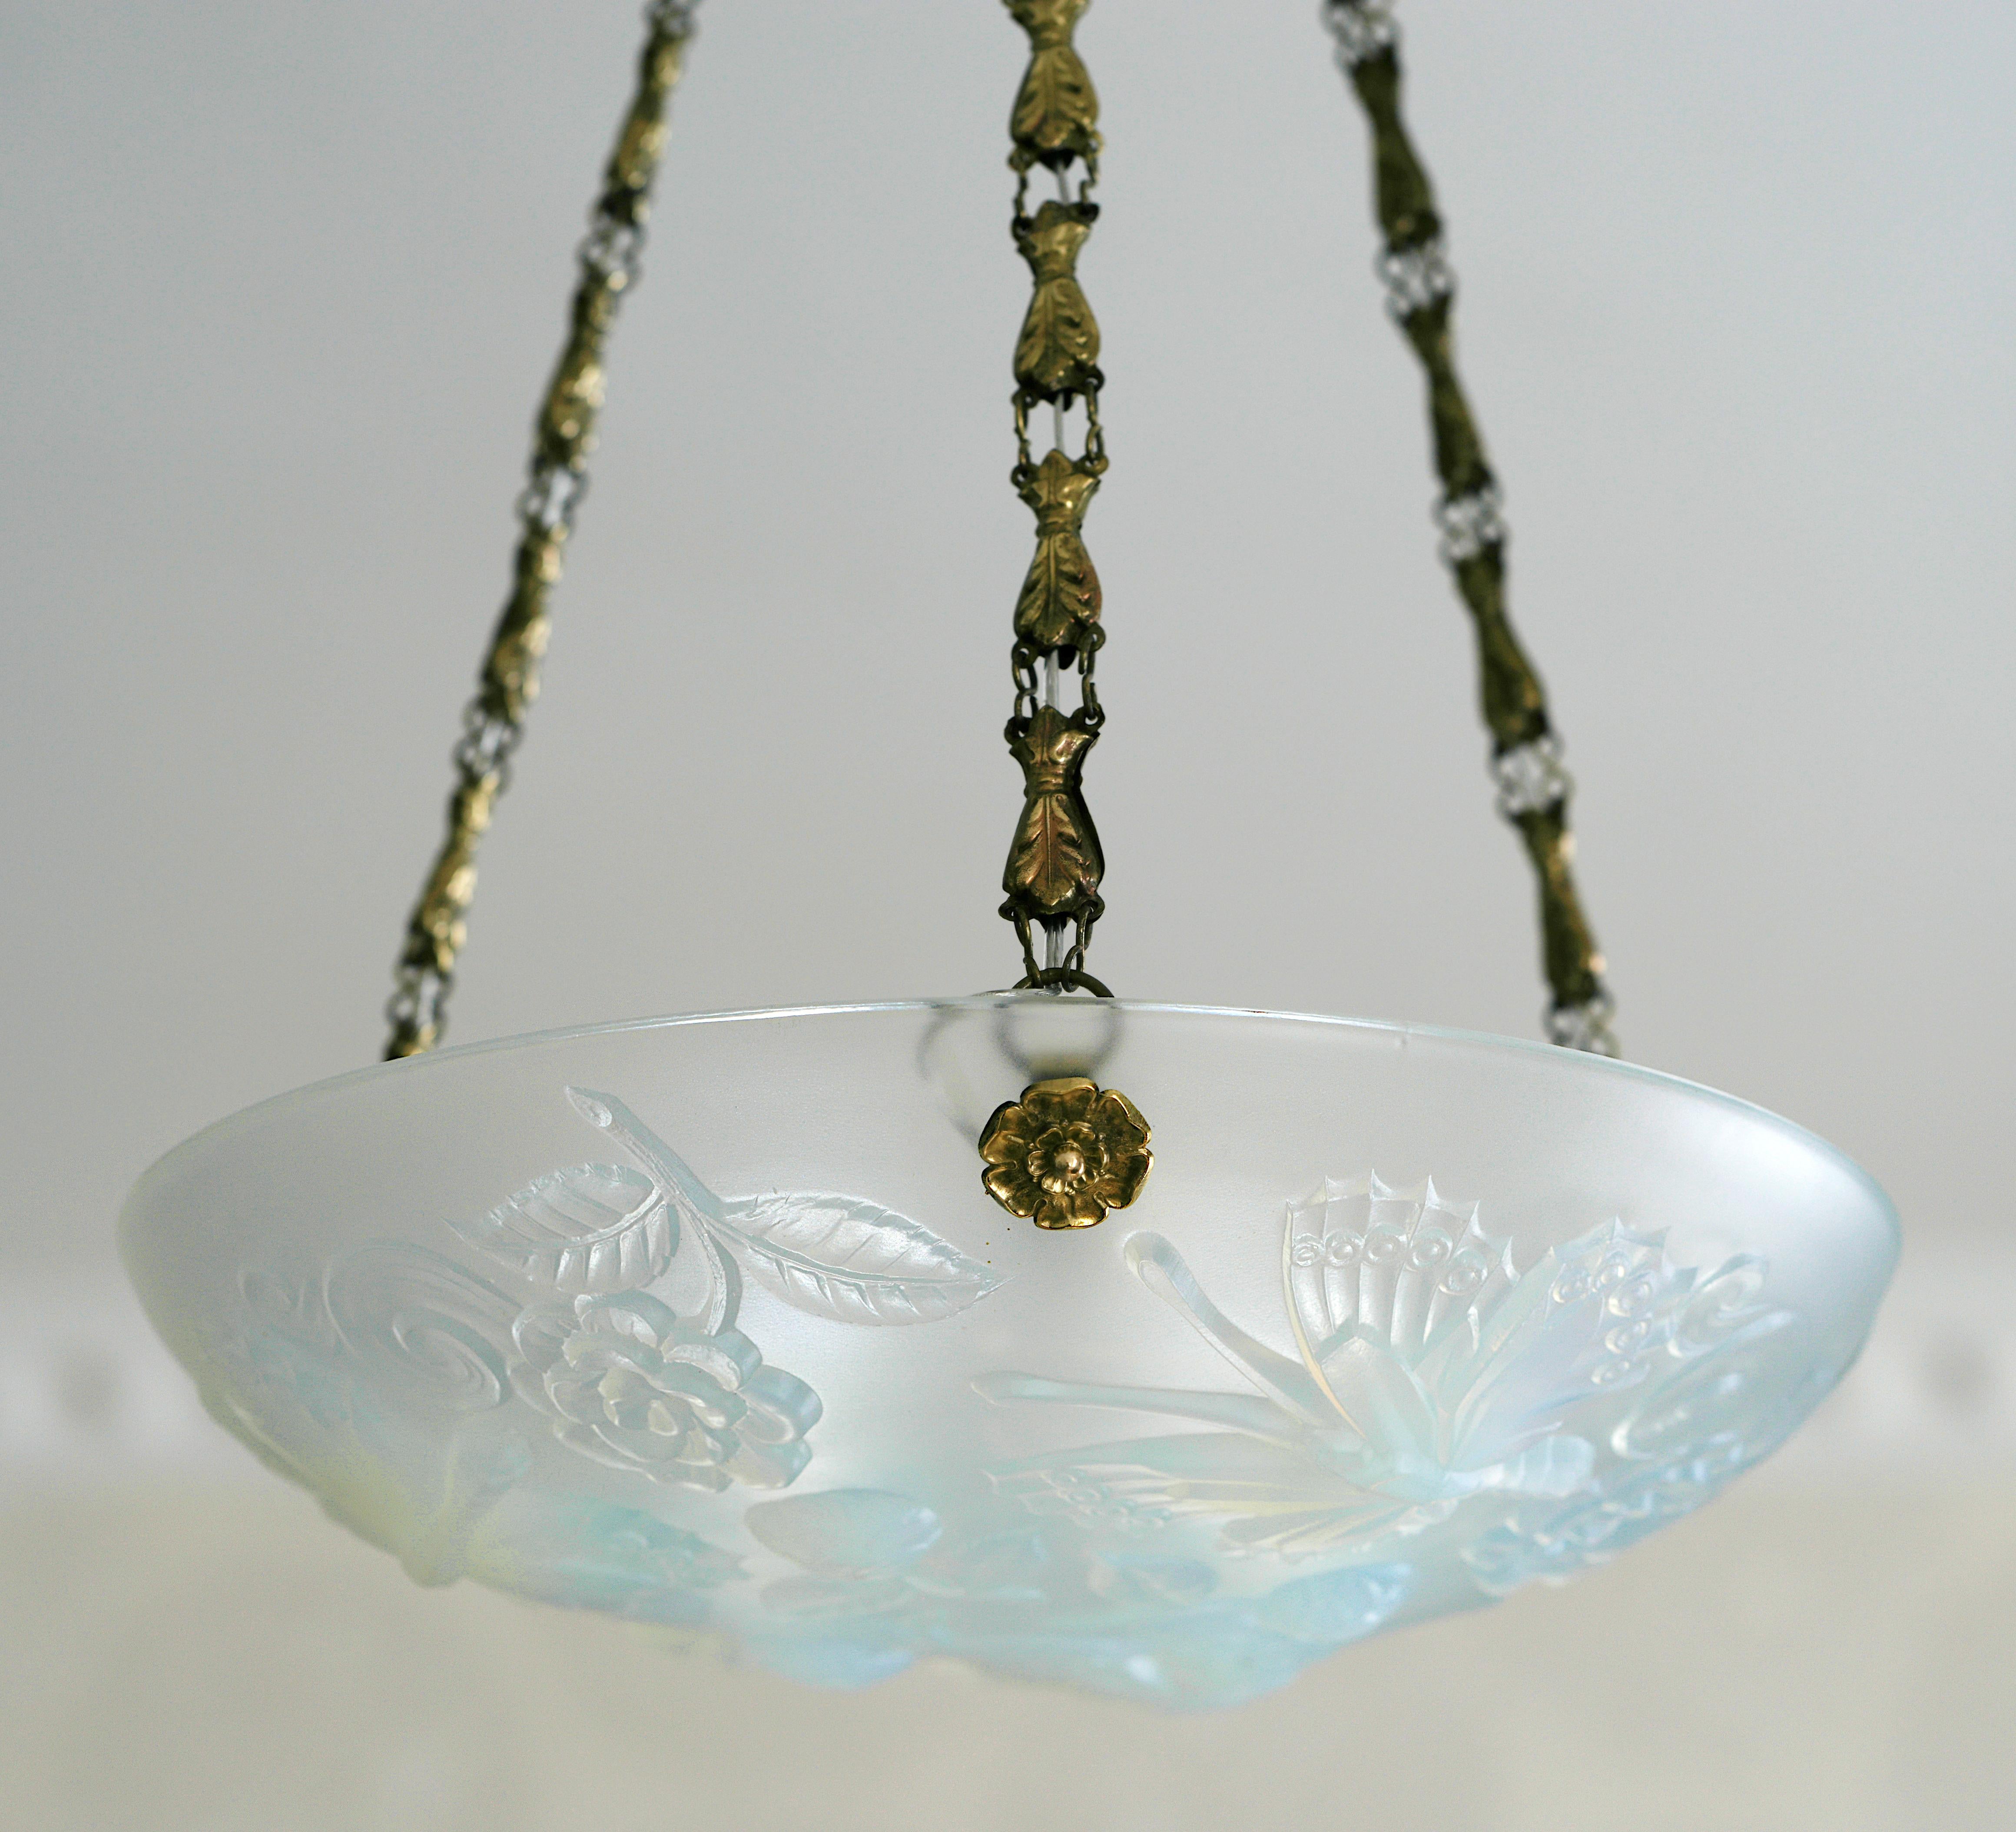 Brass Choisy-le-Roi French Art Deco Butterfly Opalescent Pendant Chandelier, 1930s For Sale